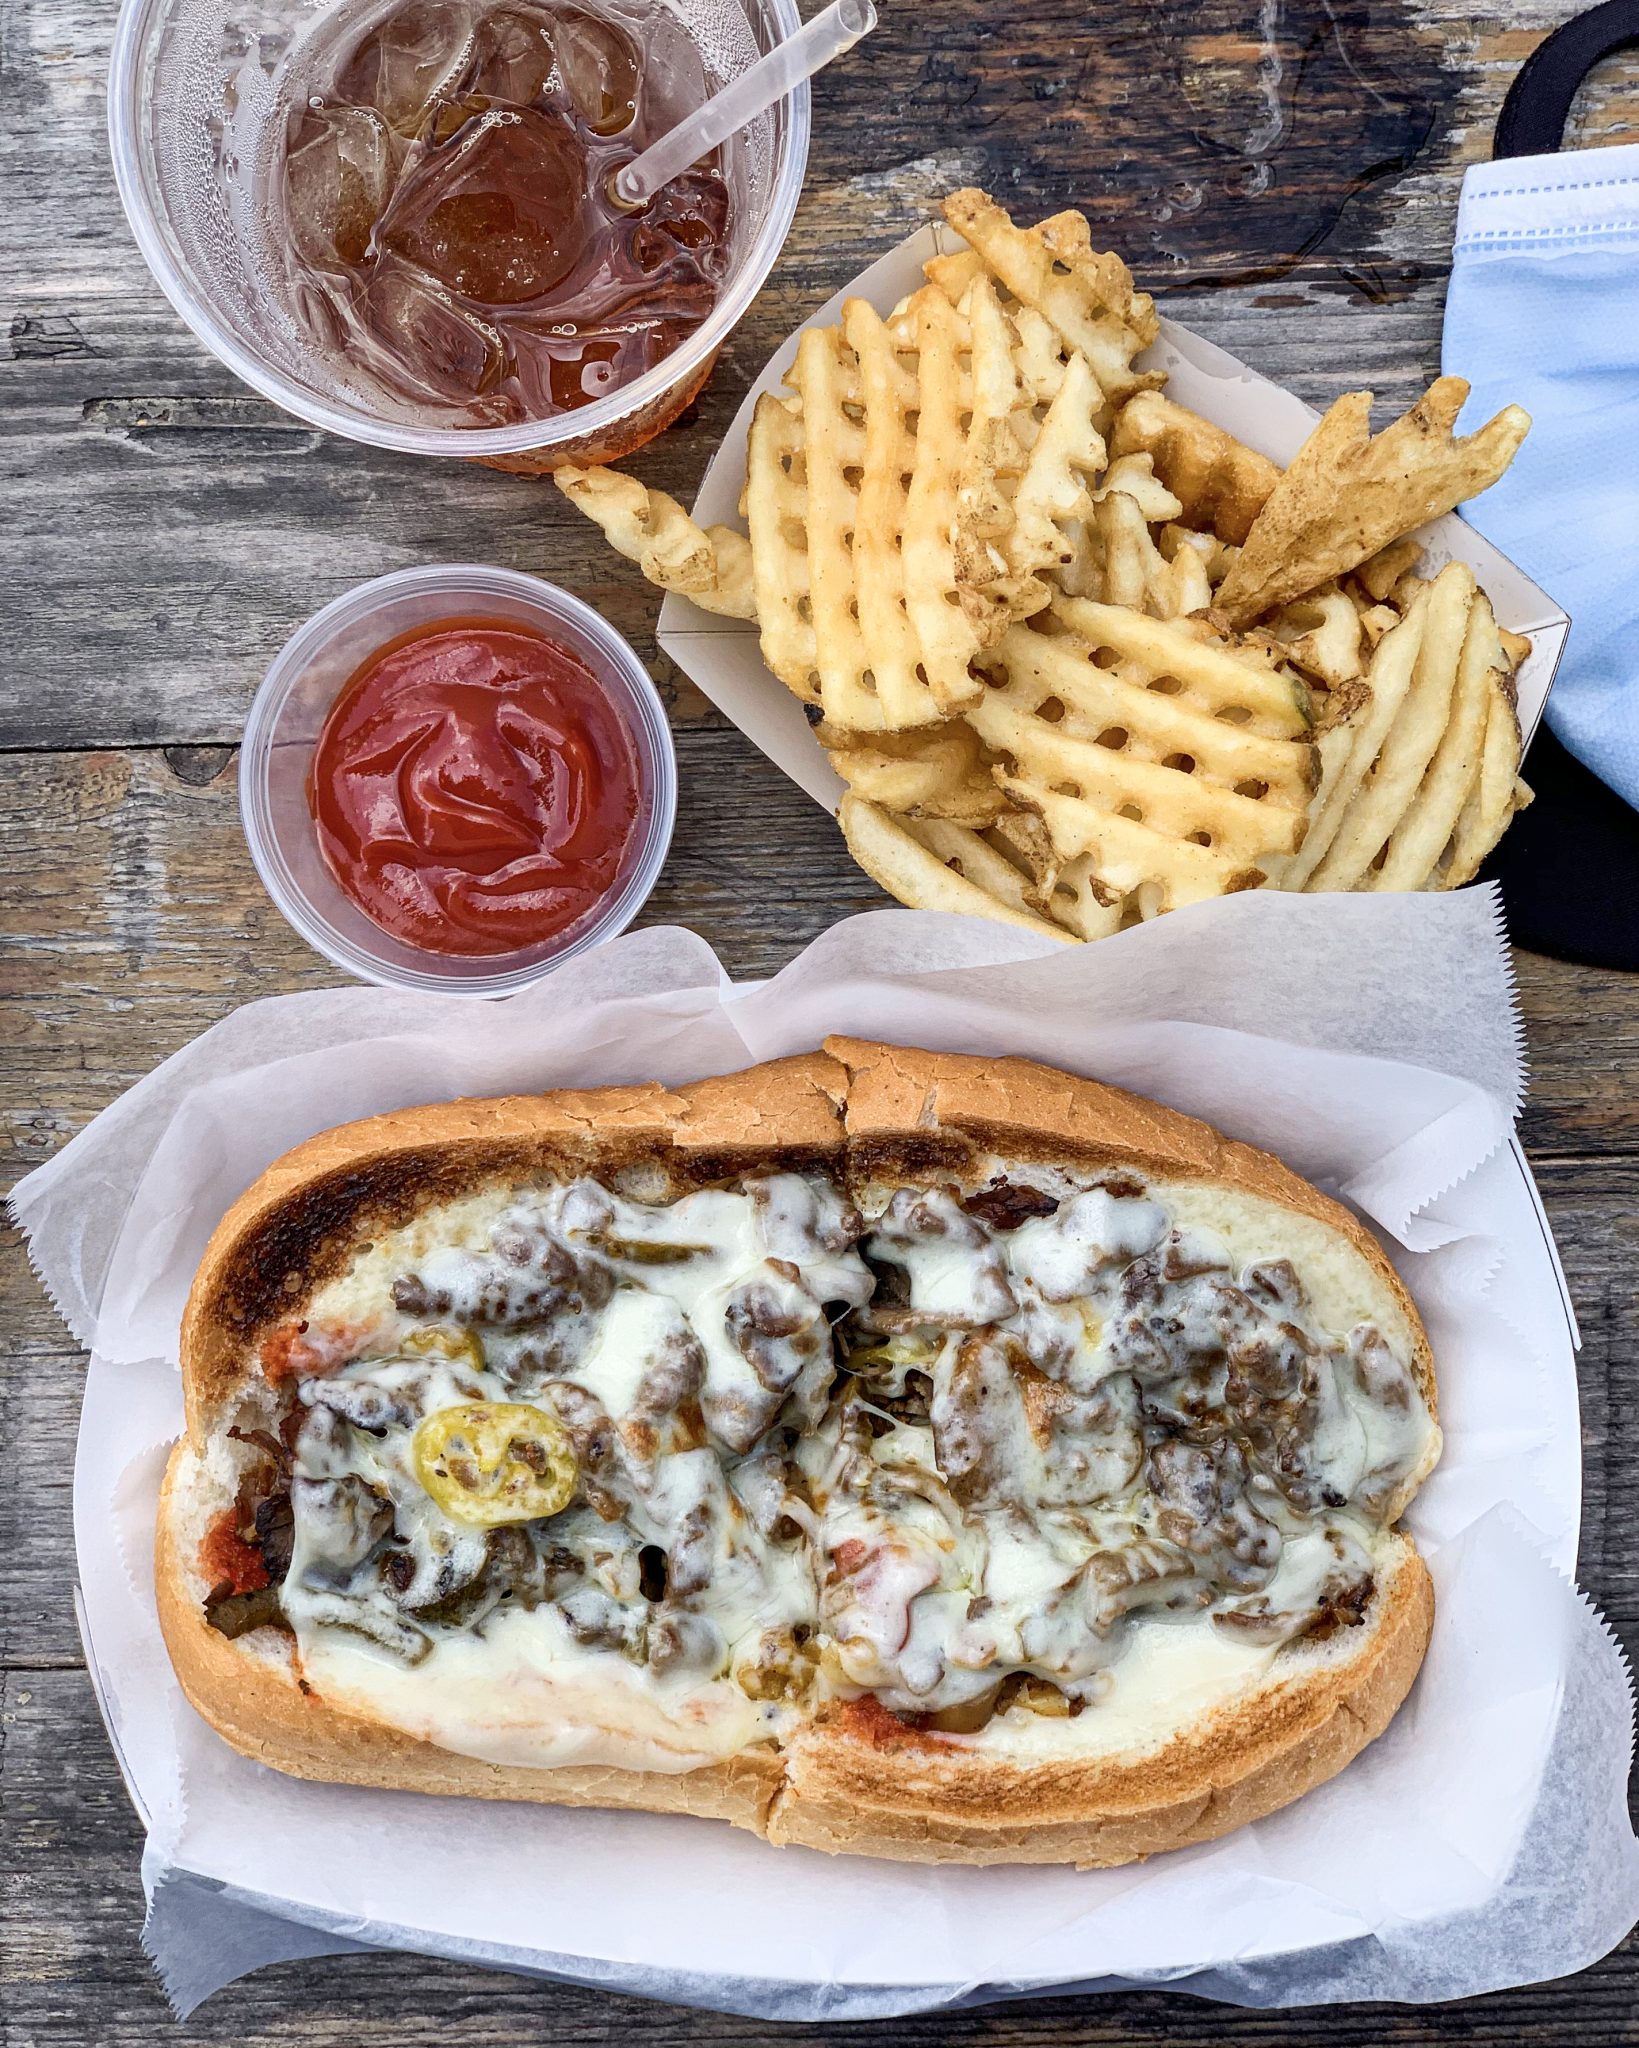 Top view of a Philly cheesesteak, fries, and ketchup on a wooden table